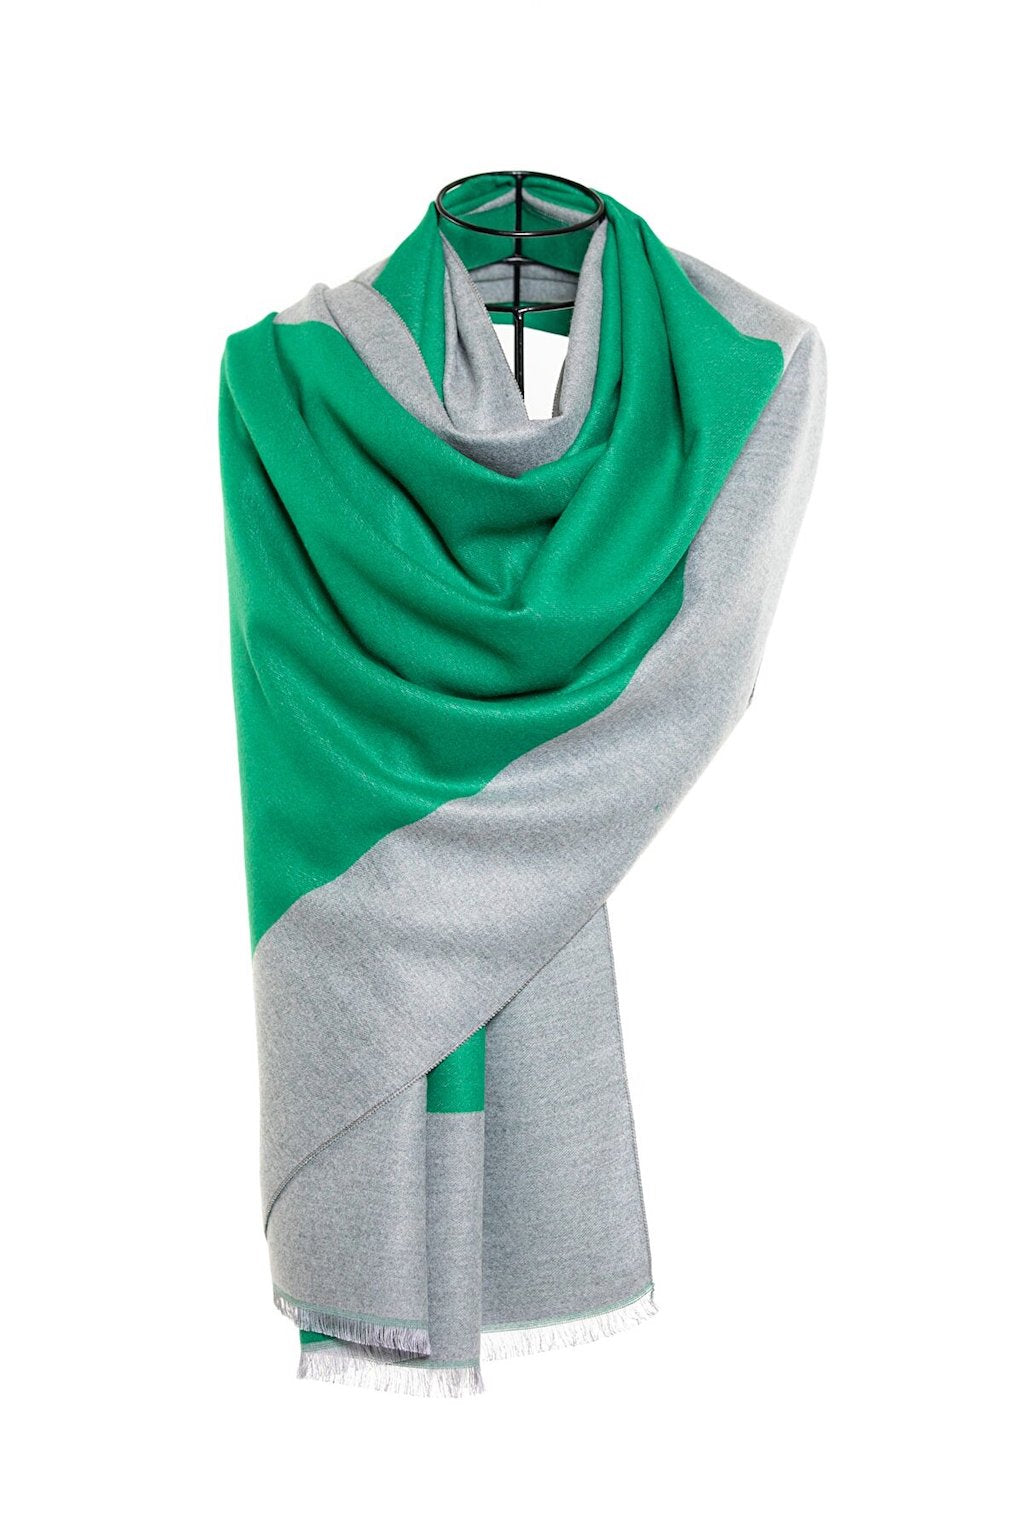 Reversible Mo-shmere Double Rectangle Shawl - Jade Gray